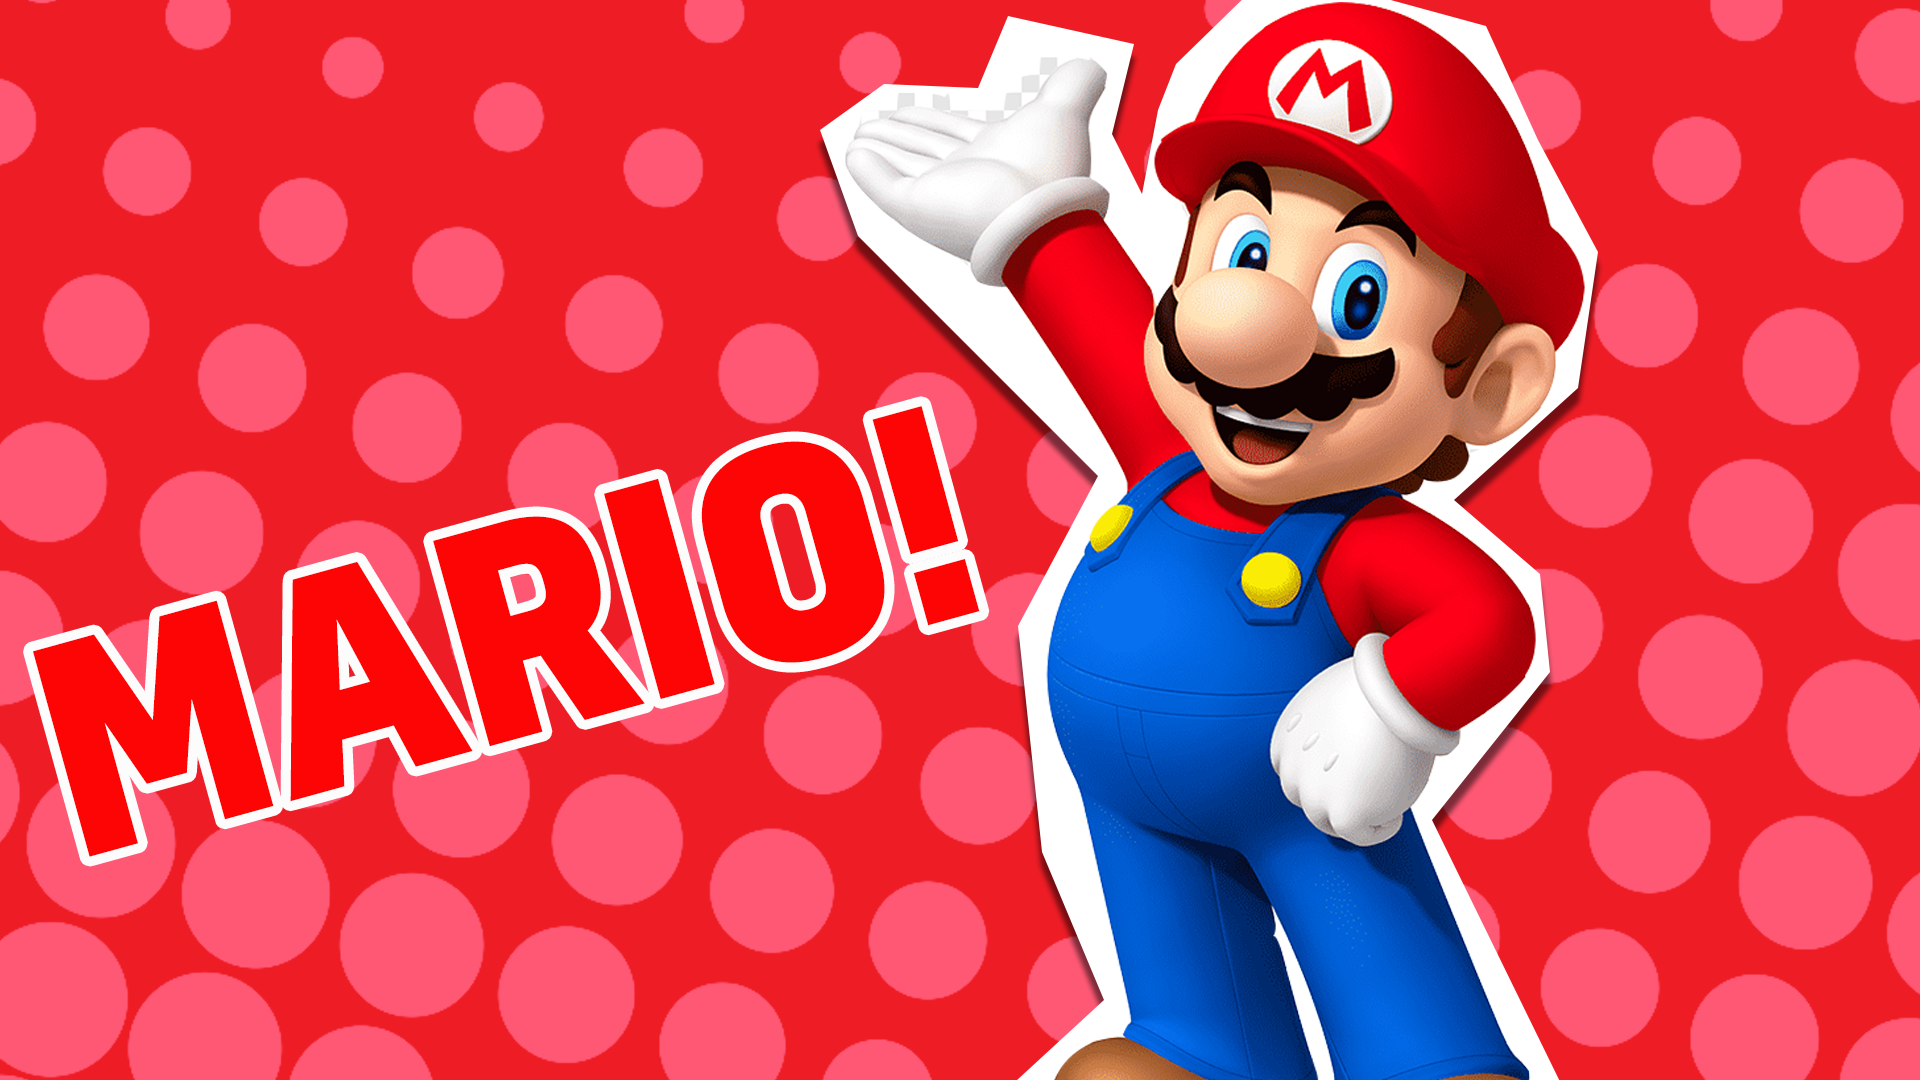 You're more Mario! You're good, honest and fun! You care loads about your friends and family and are always looking out for them! And you'd never cheat at any games!